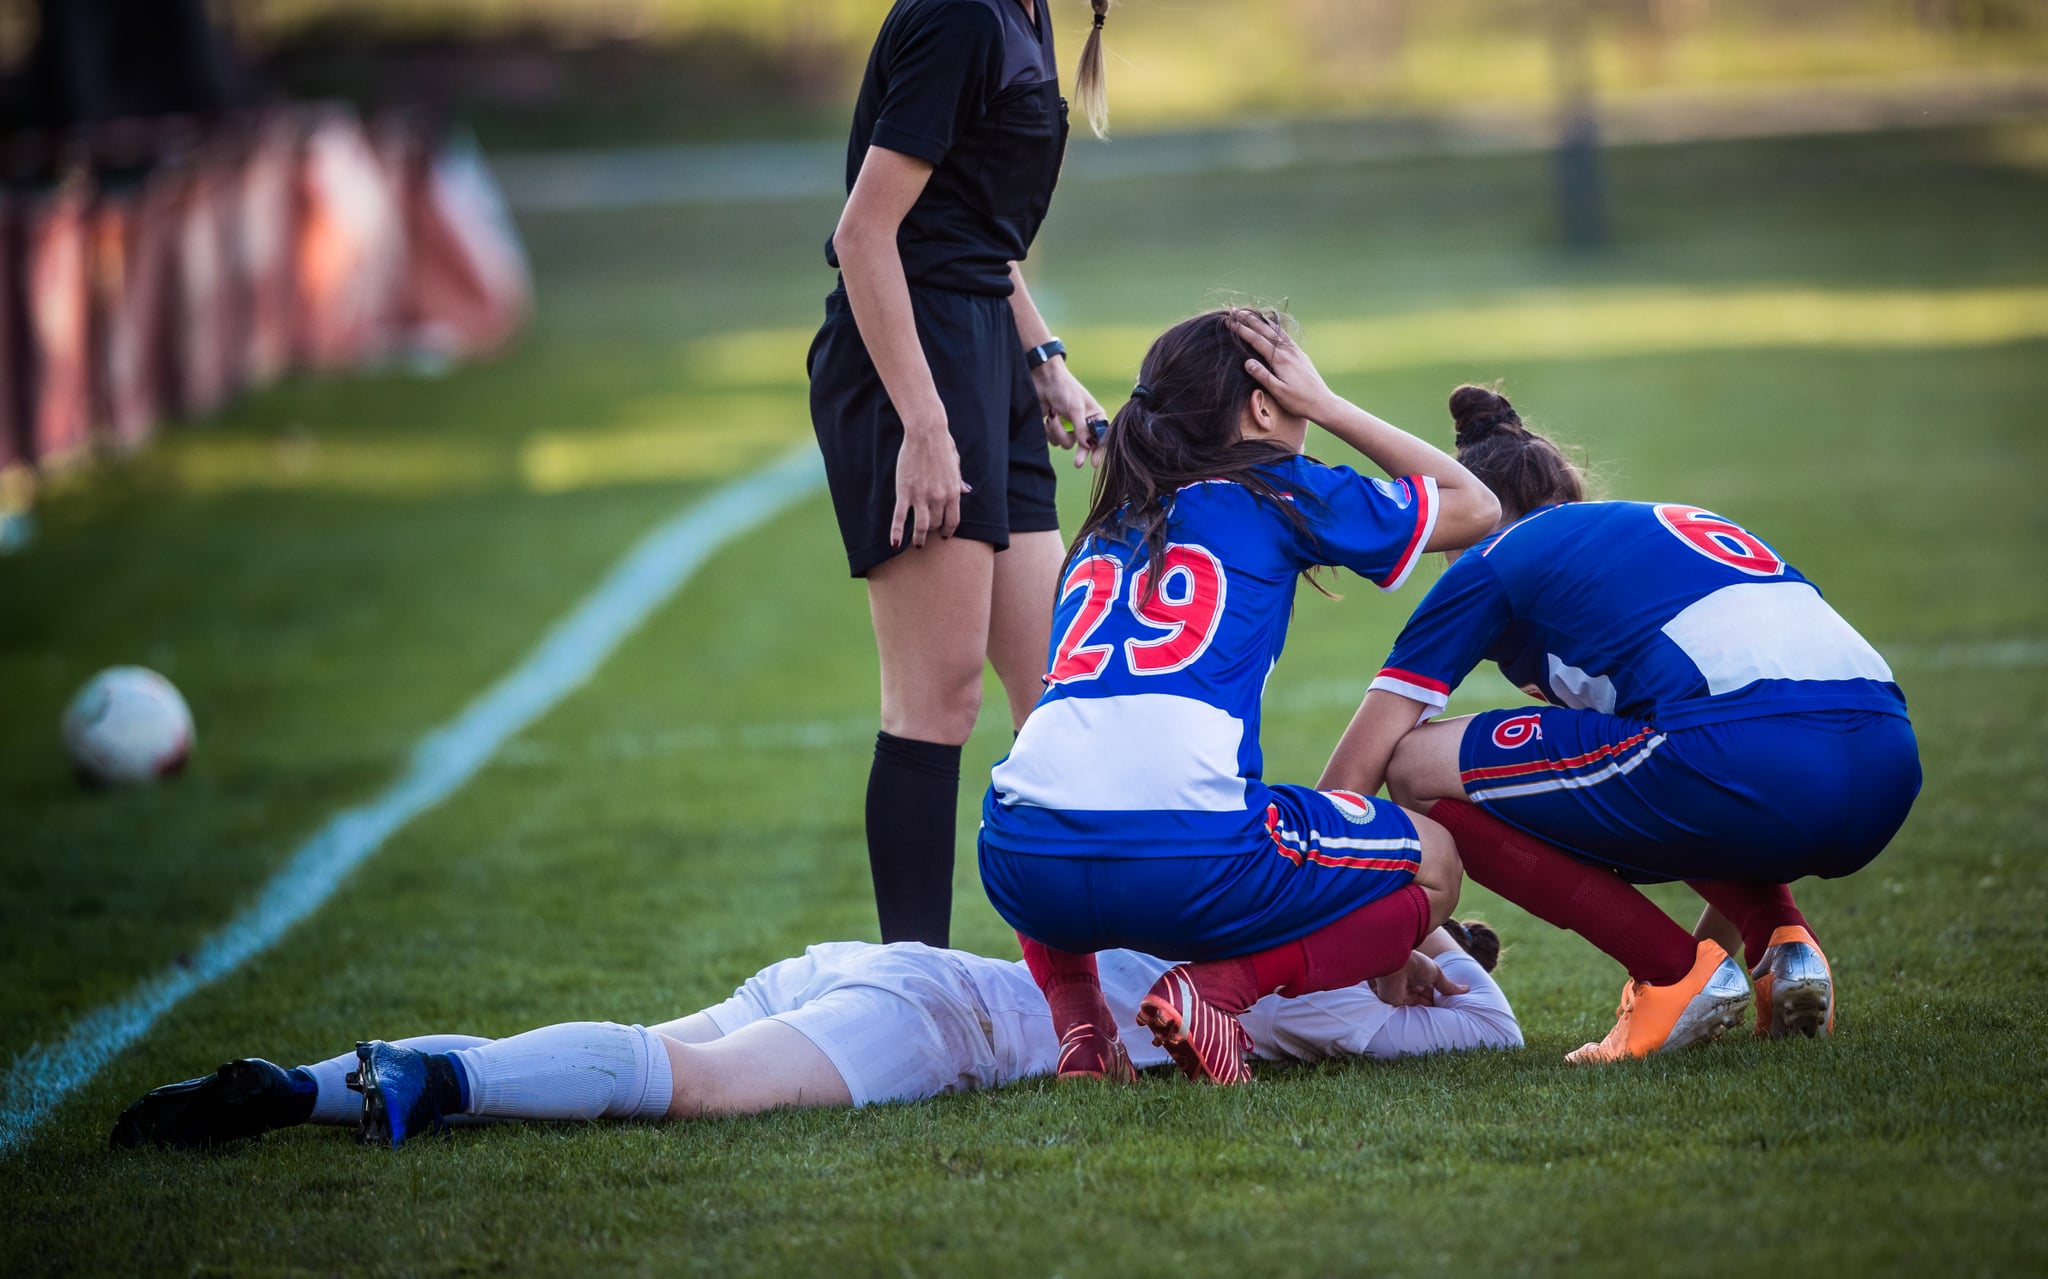 Group of female soccer players and referee gathering around injured player on playing field.